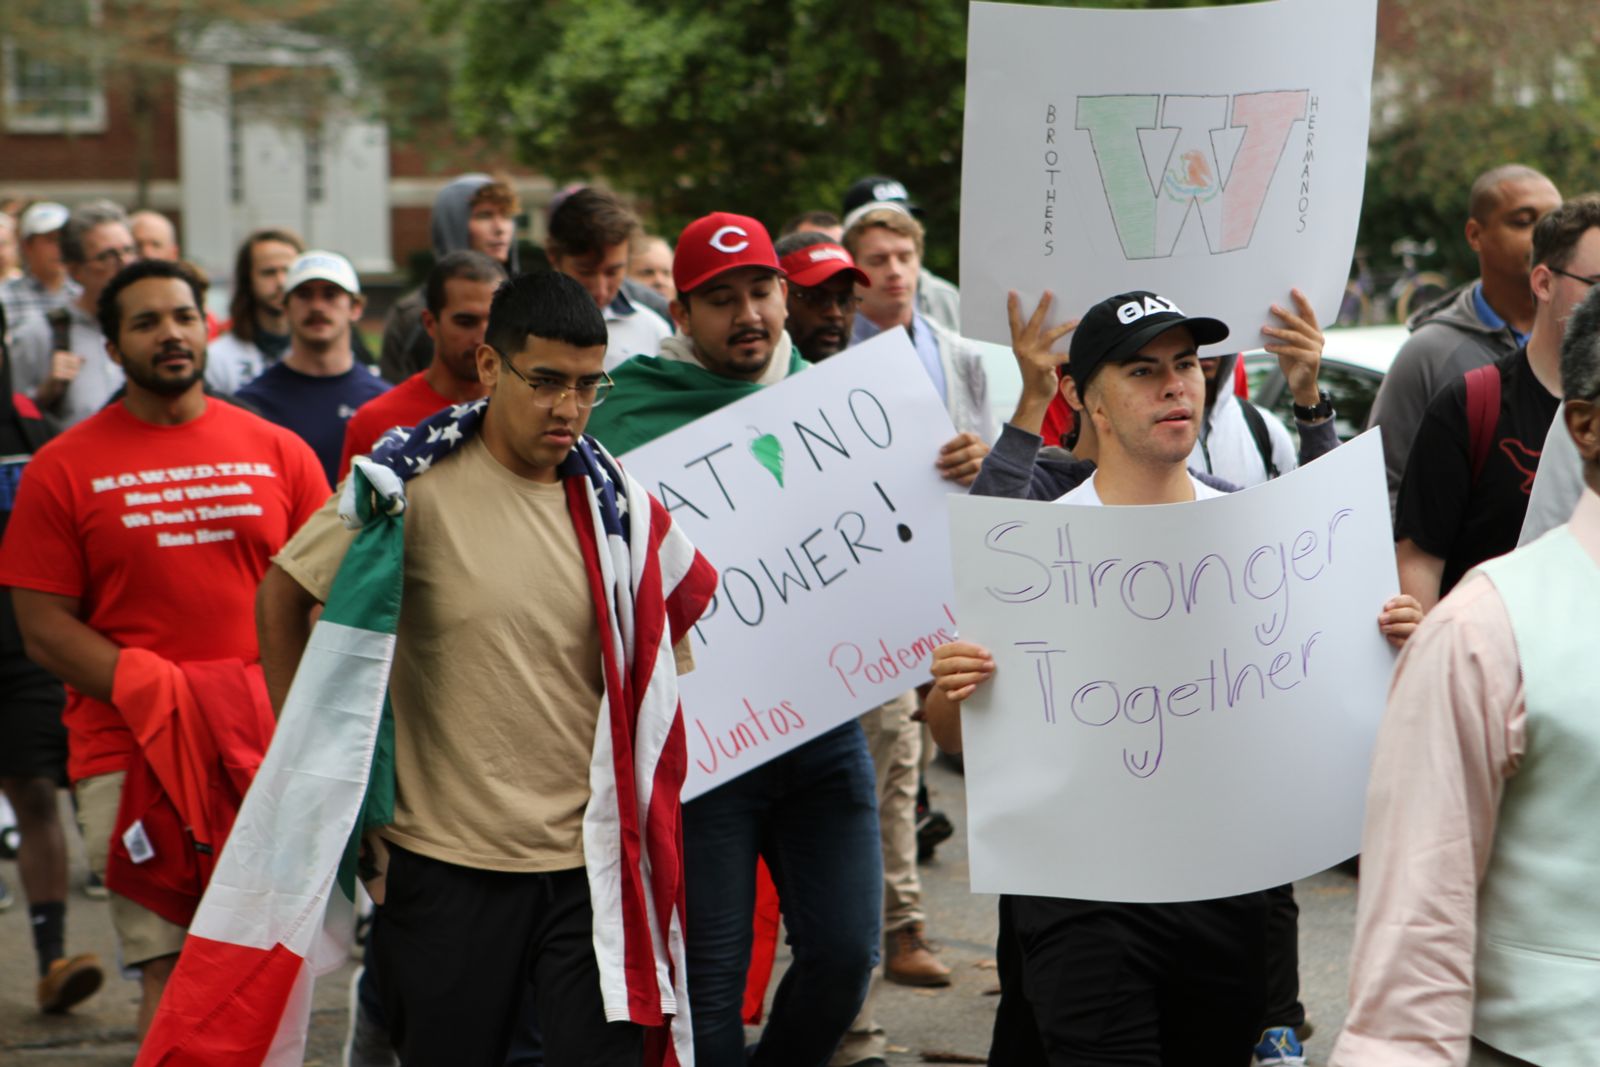 Students carried signs during the unity walk that displayed positive messages and images that show support toward equality.